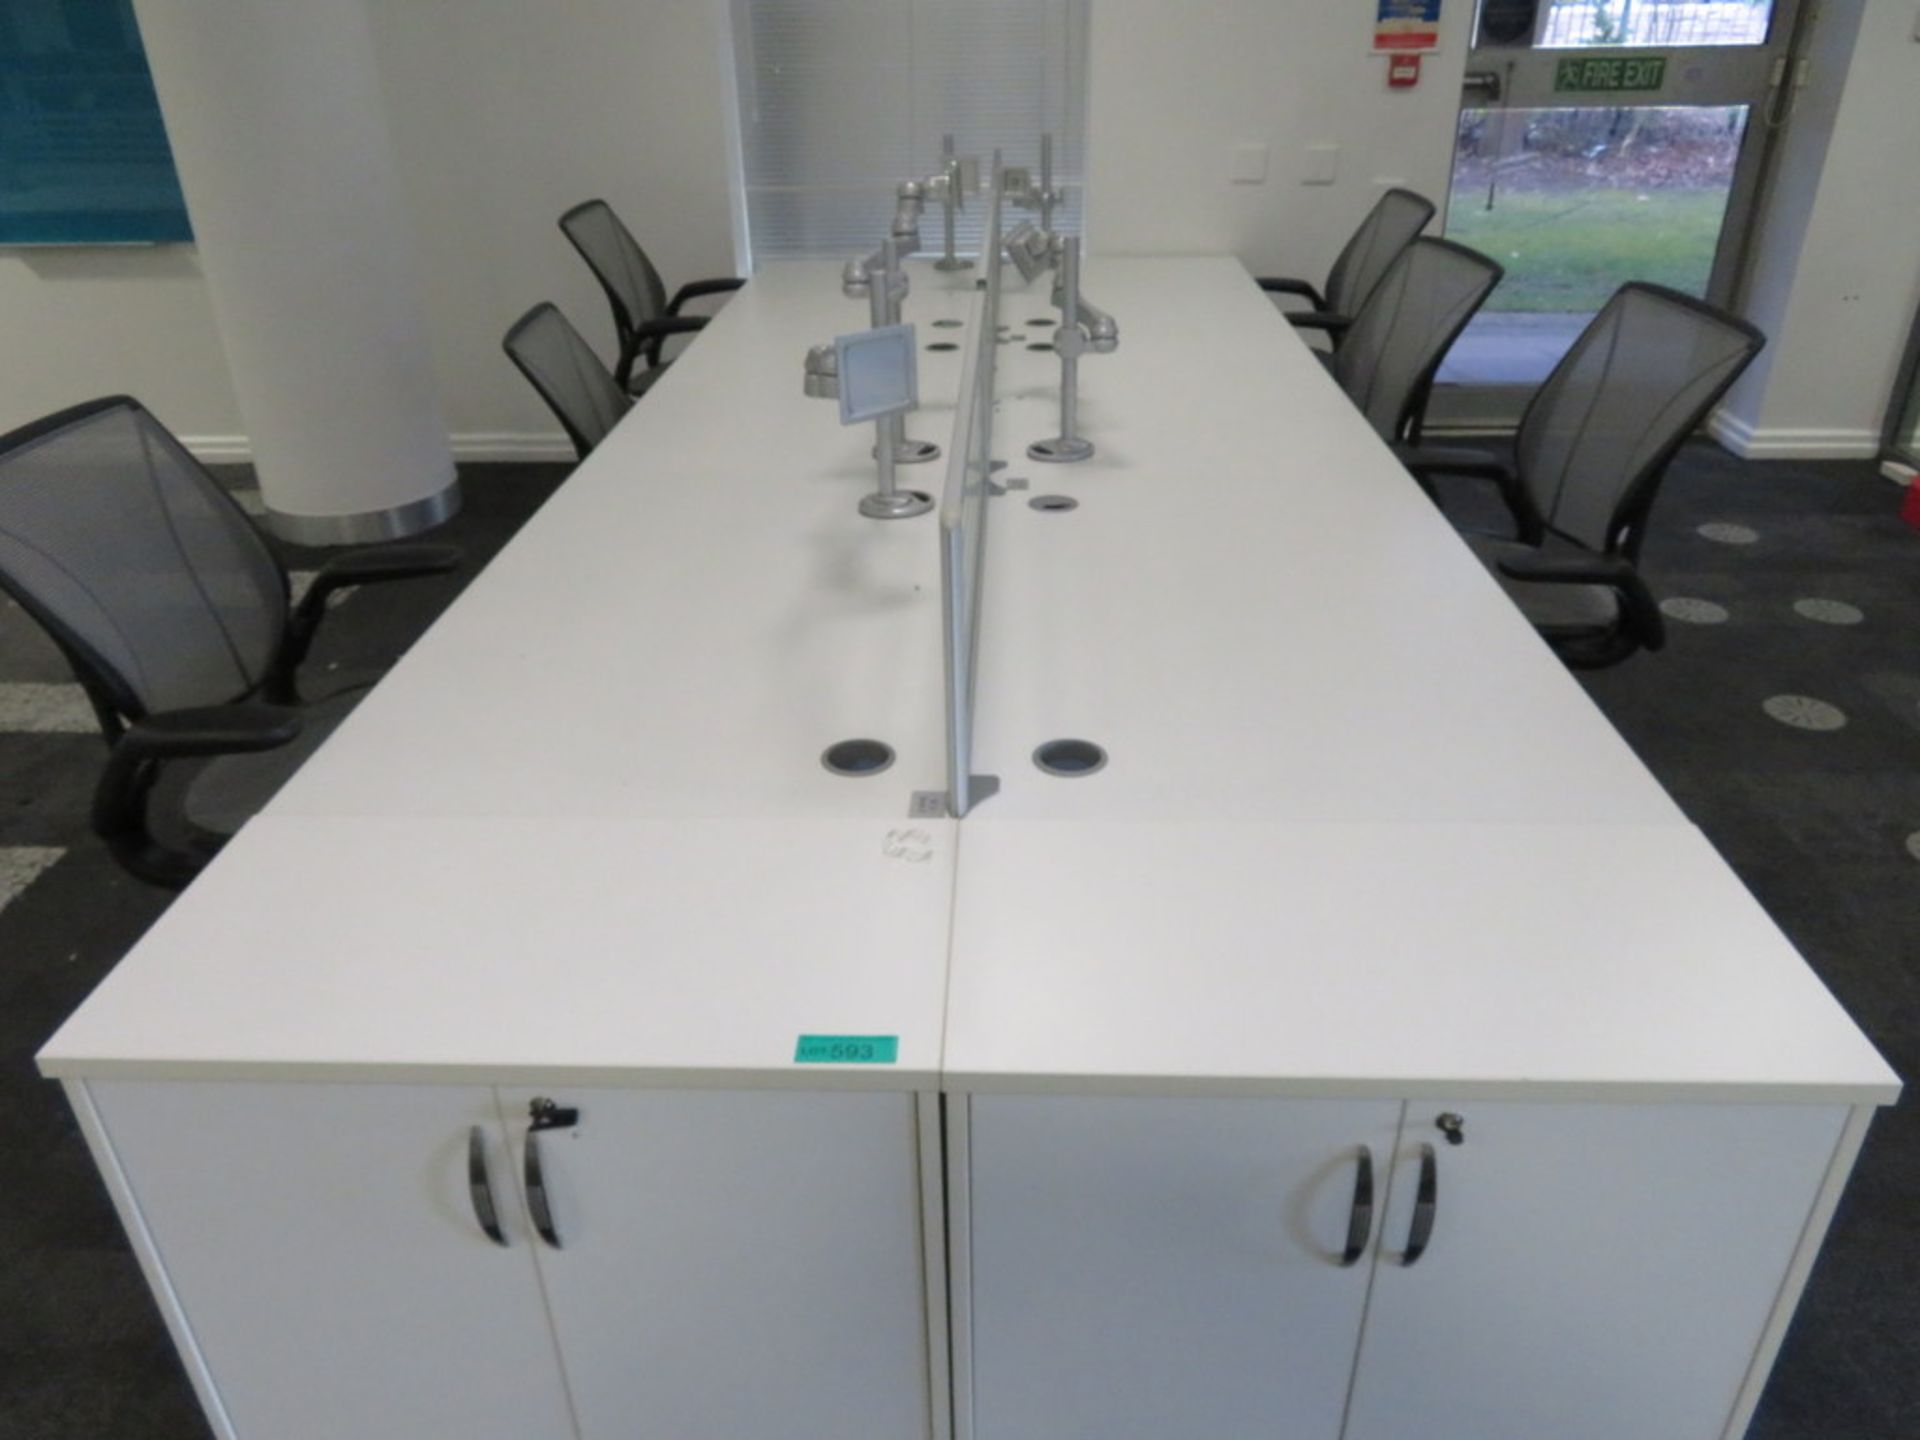 6 Person Desk Arrangement With Dividers, Monitor Arms & Storage Cupboards. Chairs Are Not Included. - Image 2 of 4